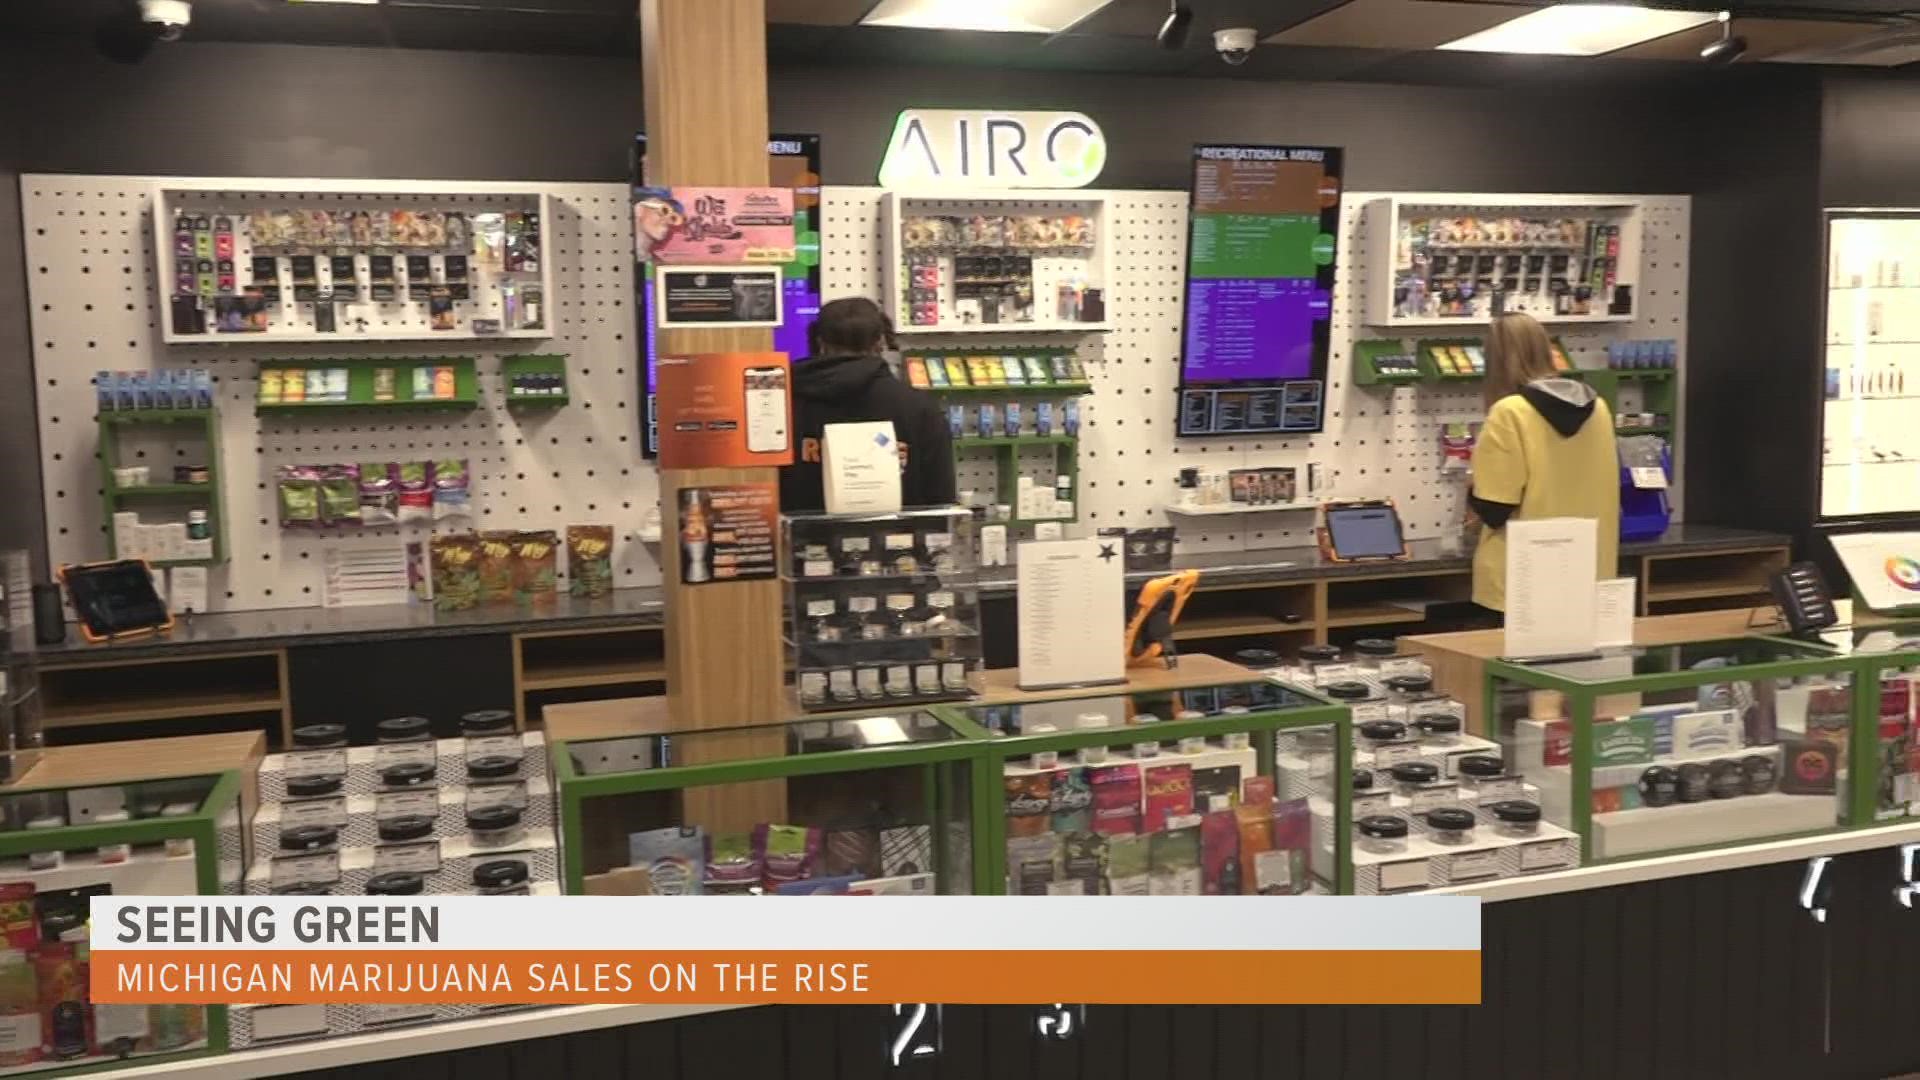 Retailers have continued to see growth in the market since marijuana was legalized in Michigan, but they do expect sales to plateau in the future.